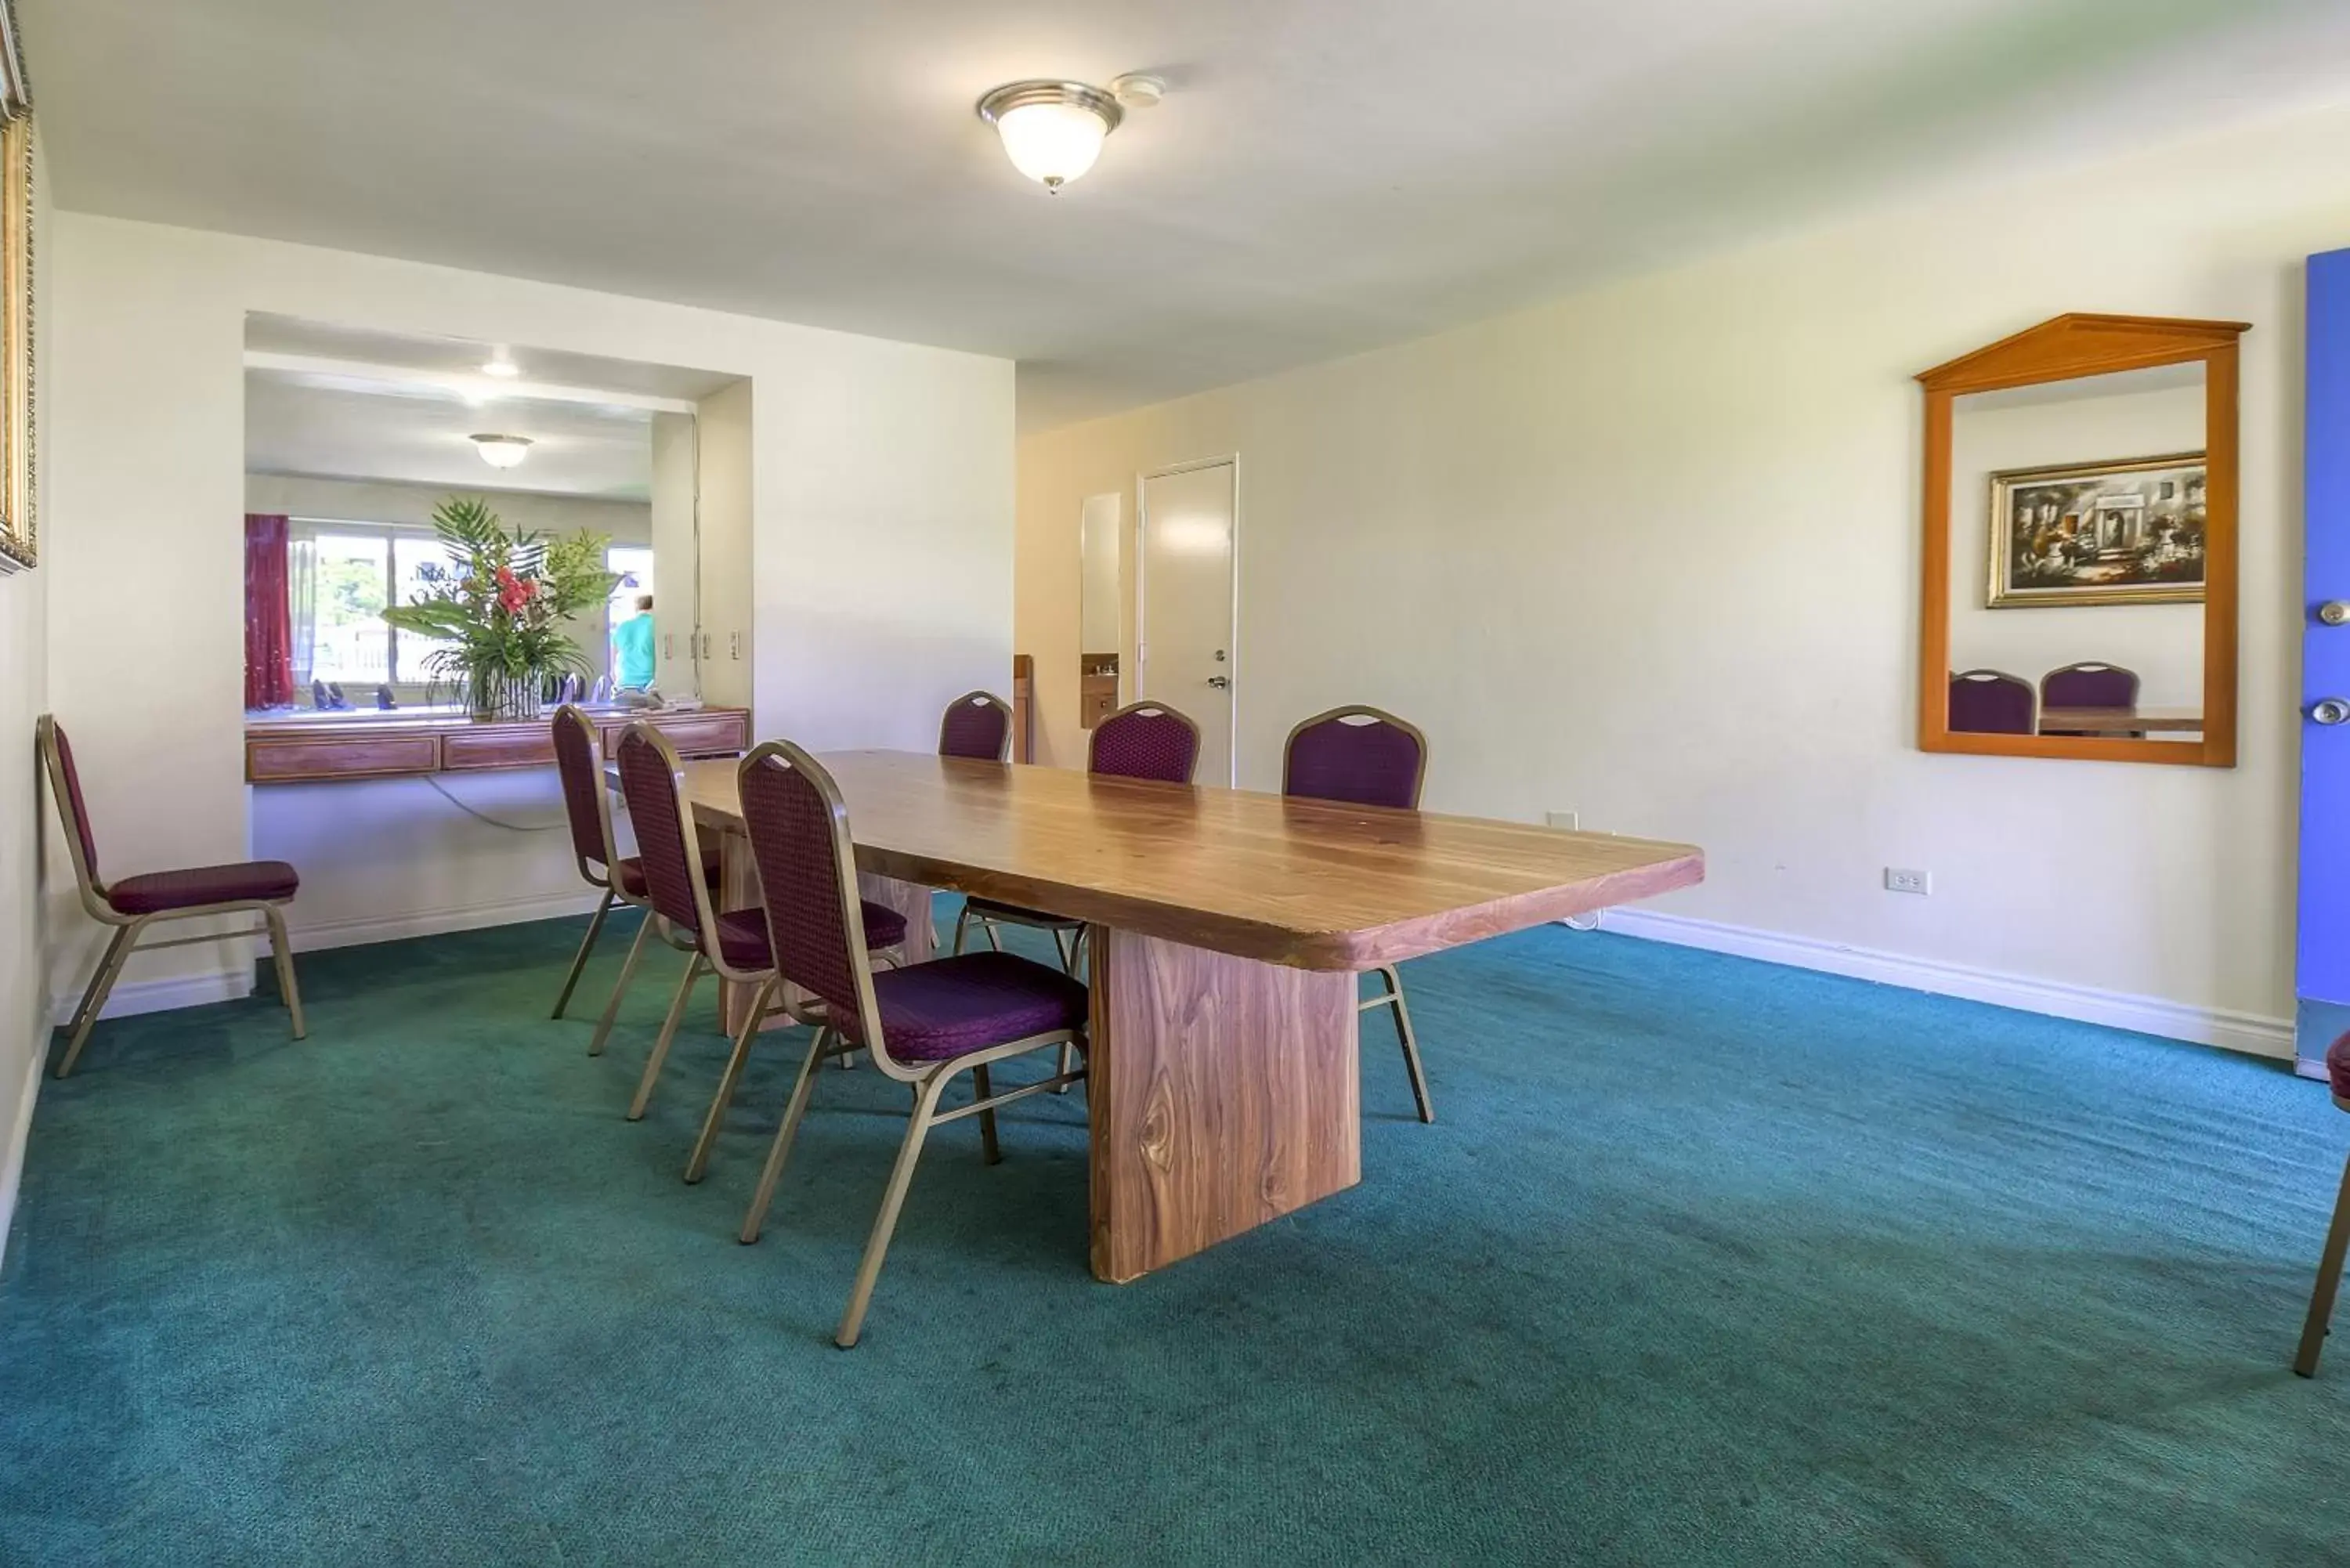 Meeting/conference room in Motel 6-Claremont, CA